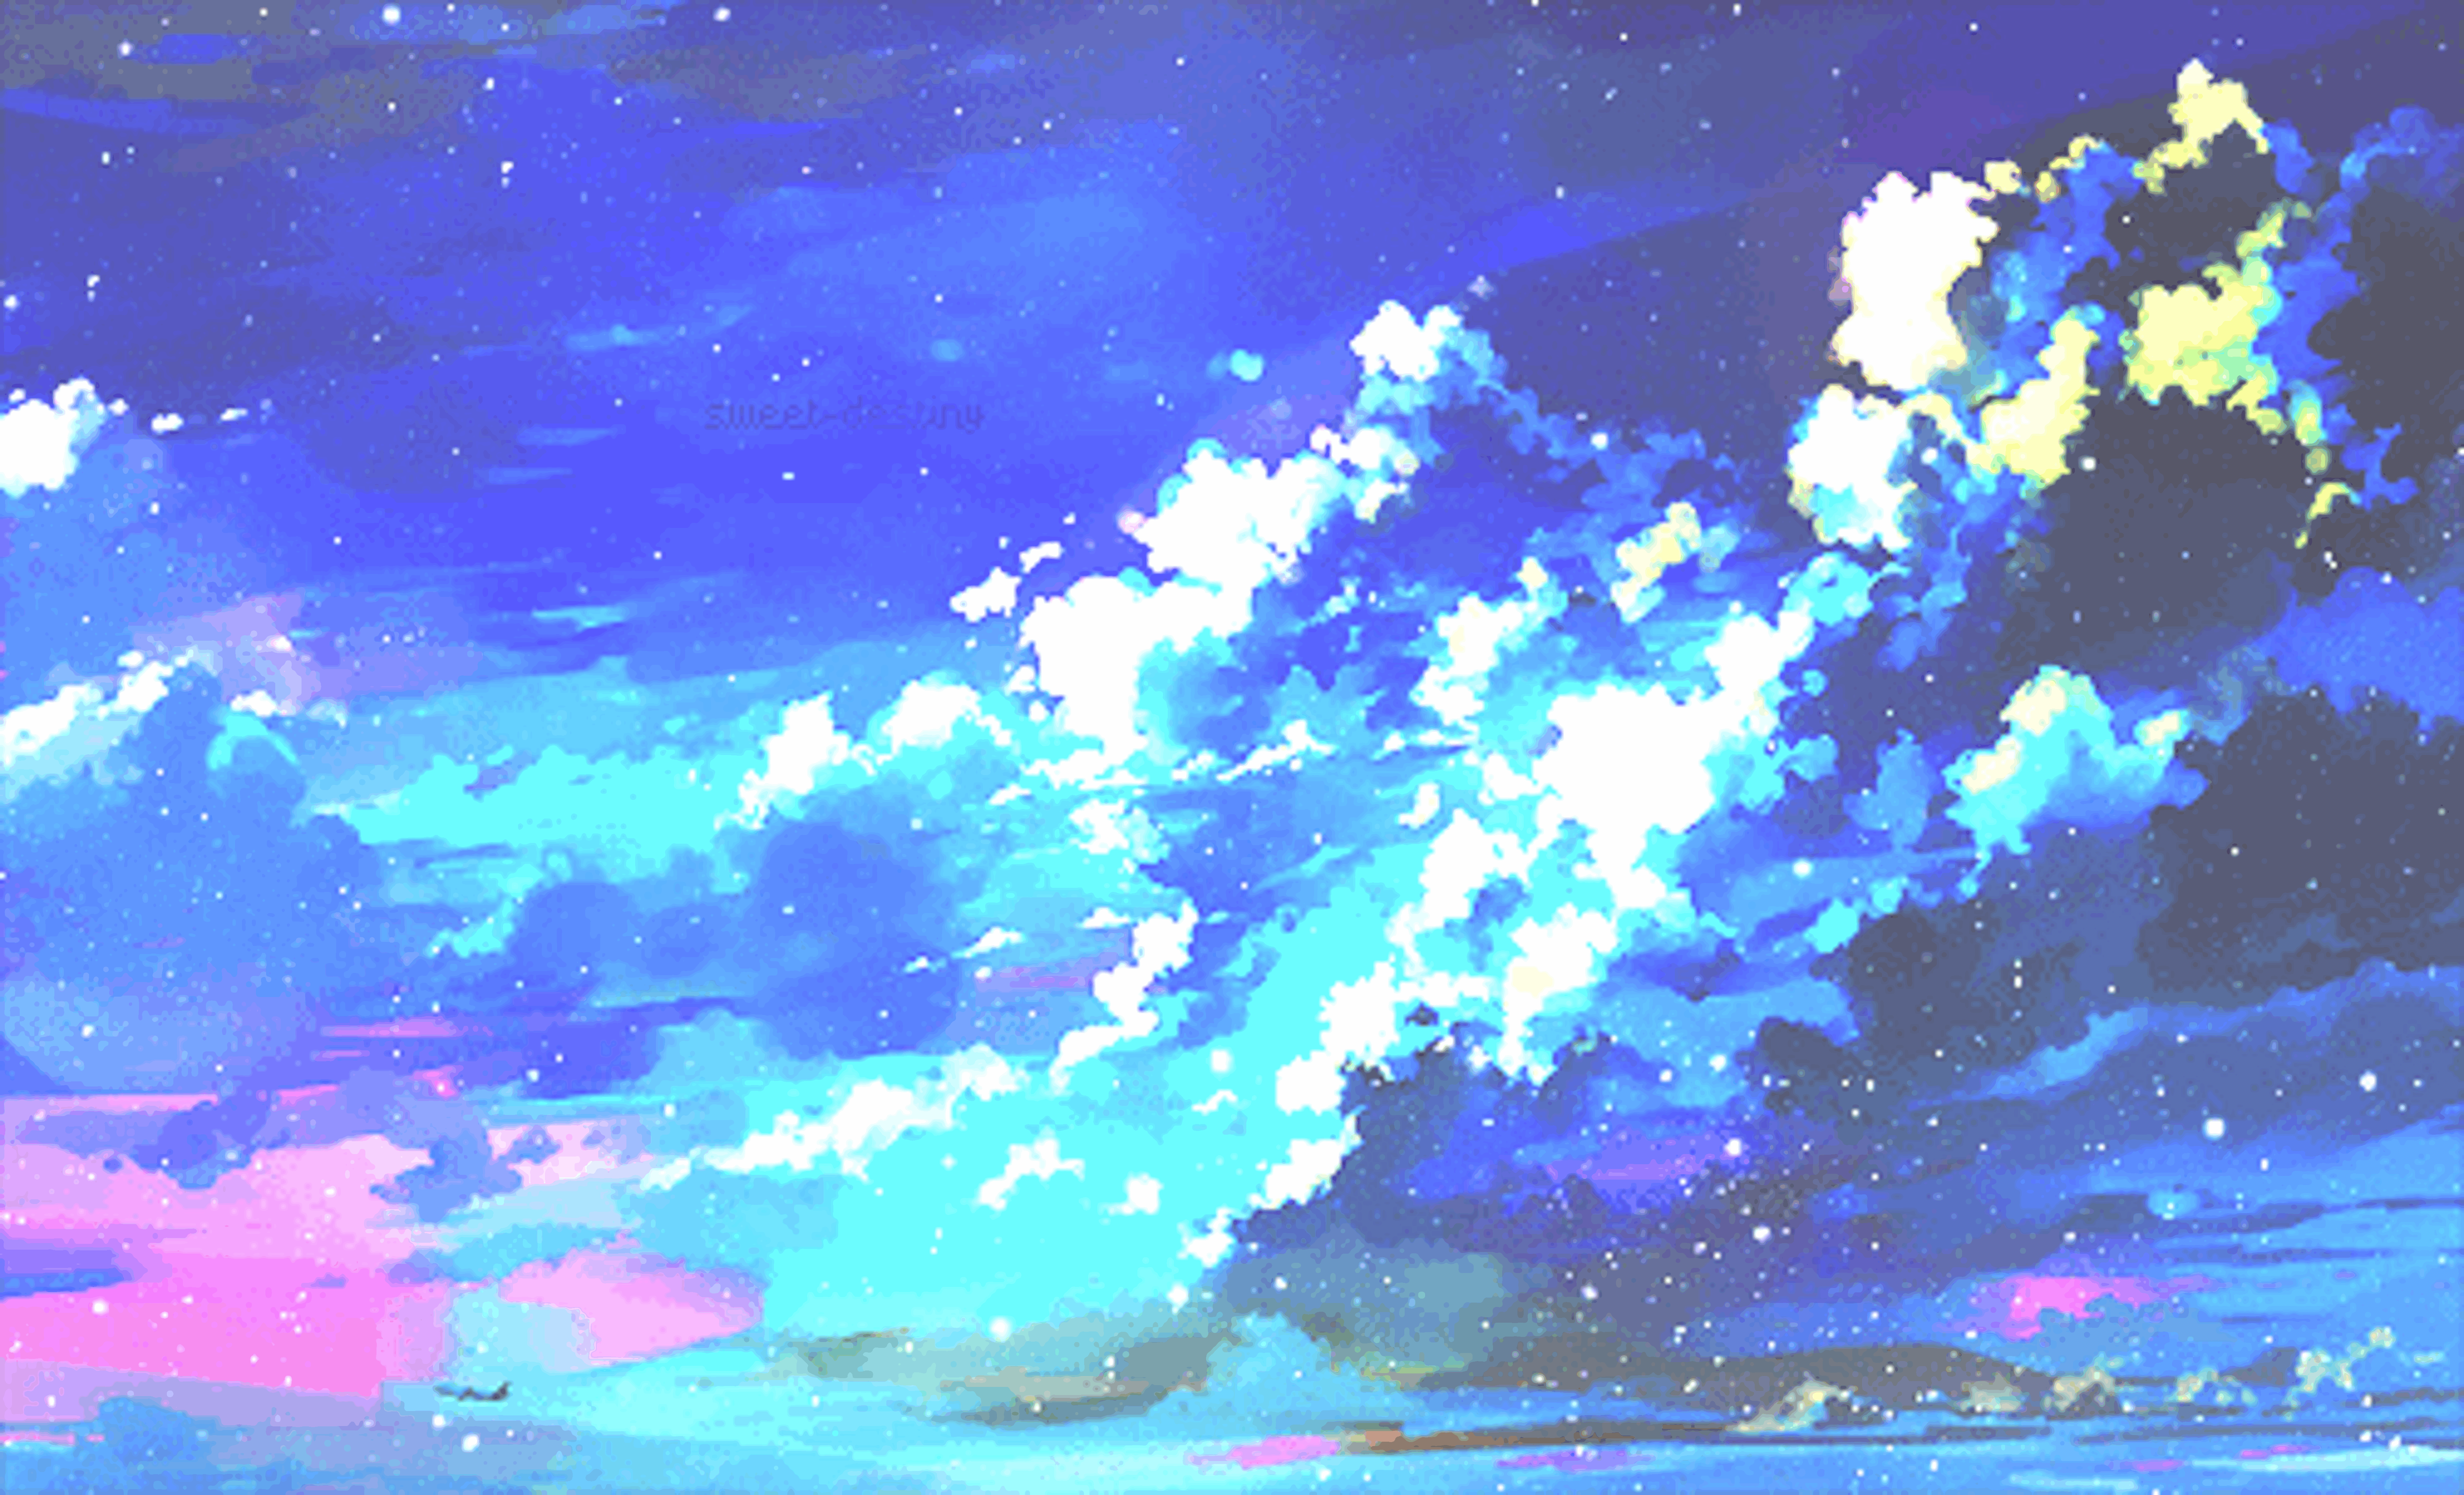 Blue Wallpapers Aesthetic Anime.